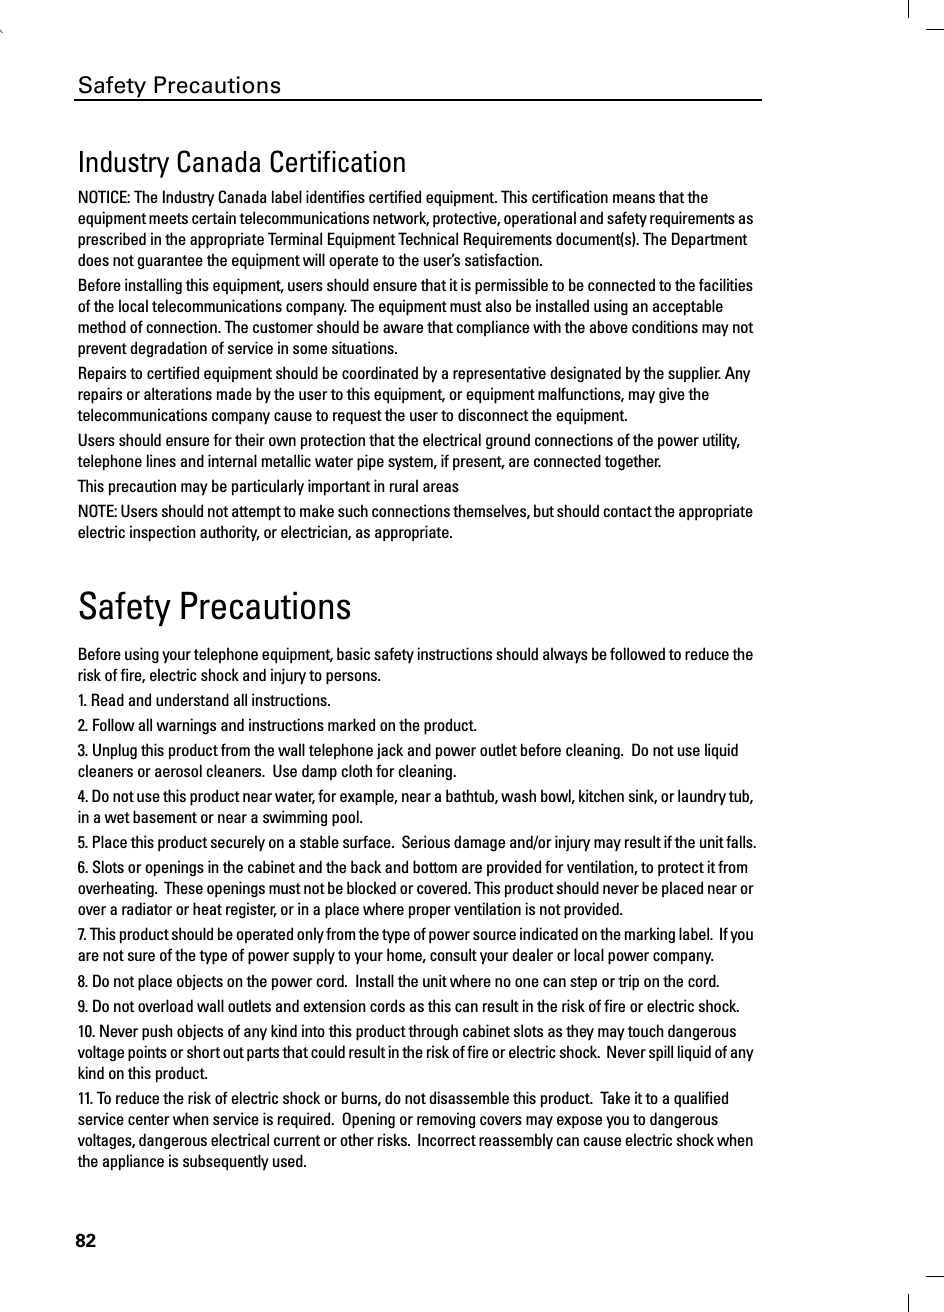 82Safety PrecautionsIndustry Canada CertificationNOTICE: The Industry Canada label identifies certified equipment. This certification means that the equipment meets certain telecommunications network, protective, operational and safety requirements as prescribed in the appropriate Terminal Equipment Technical Requirements document(s). The Department does not guarantee the equipment will operate to the user’s satisfaction.Before installing this equipment, users should ensure that it is permissible to be connected to the facilities of the local telecommunications company. The equipment must also be installed using an acceptable method of connection. The customer should be aware that compliance with the above conditions may not prevent degradation of service in some situations.Repairs to certified equipment should be coordinated by a representative designated by the supplier. Any repairs or alterations made by the user to this equipment, or equipment malfunctions, may give the telecommunications company cause to request the user to disconnect the equipment.Users should ensure for their own protection that the electrical ground connections of the power utility, telephone lines and internal metallic water pipe system, if present, are connected together.This precaution may be particularly important in rural areasNOTE: Users should not attempt to make such connections themselves, but should contact the appropriate electric inspection authority, or electrician, as appropriate.Safety PrecautionsBefore using your telephone equipment, basic safety instructions should always be followed to reduce the risk of fire, electric shock and injury to persons. 1. Read and understand all instructions.2. Follow all warnings and instructions marked on the product.3. Unplug this product from the wall telephone jack and power outlet before cleaning.  Do not use liquid cleaners or aerosol cleaners.  Use damp cloth for cleaning. 4. Do not use this product near water, for example, near a bathtub, wash bowl, kitchen sink, or laundry tub, in a wet basement or near a swimming pool.5. Place this product securely on a stable surface.  Serious damage and/or injury may result if the unit falls.6. Slots or openings in the cabinet and the back and bottom are provided for ventilation, to protect it from overheating.  These openings must not be blocked or covered. This product should never be placed near or over a radiator or heat register, or in a place where proper ventilation is not provided.7. This product should be operated only from the type of power source indicated on the marking label.  If you are not sure of the type of power supply to your home, consult your dealer or local power company.8. Do not place objects on the power cord.  Install the unit where no one can step or trip on the cord.9. Do not overload wall outlets and extension cords as this can result in the risk of fire or electric shock.10. Never push objects of any kind into this product through cabinet slots as they may touch dangerous voltage points or short out parts that could result in the risk of fire or electric shock.  Never spill liquid of any kind on this product.11. To reduce the risk of electric shock or burns, do not disassemble this product.  Take it to a qualified service center when service is required.  Opening or removing covers may expose you to dangerous voltages, dangerous electrical current or other risks.  Incorrect reassembly can cause electric shock when the appliance is subsequently used.